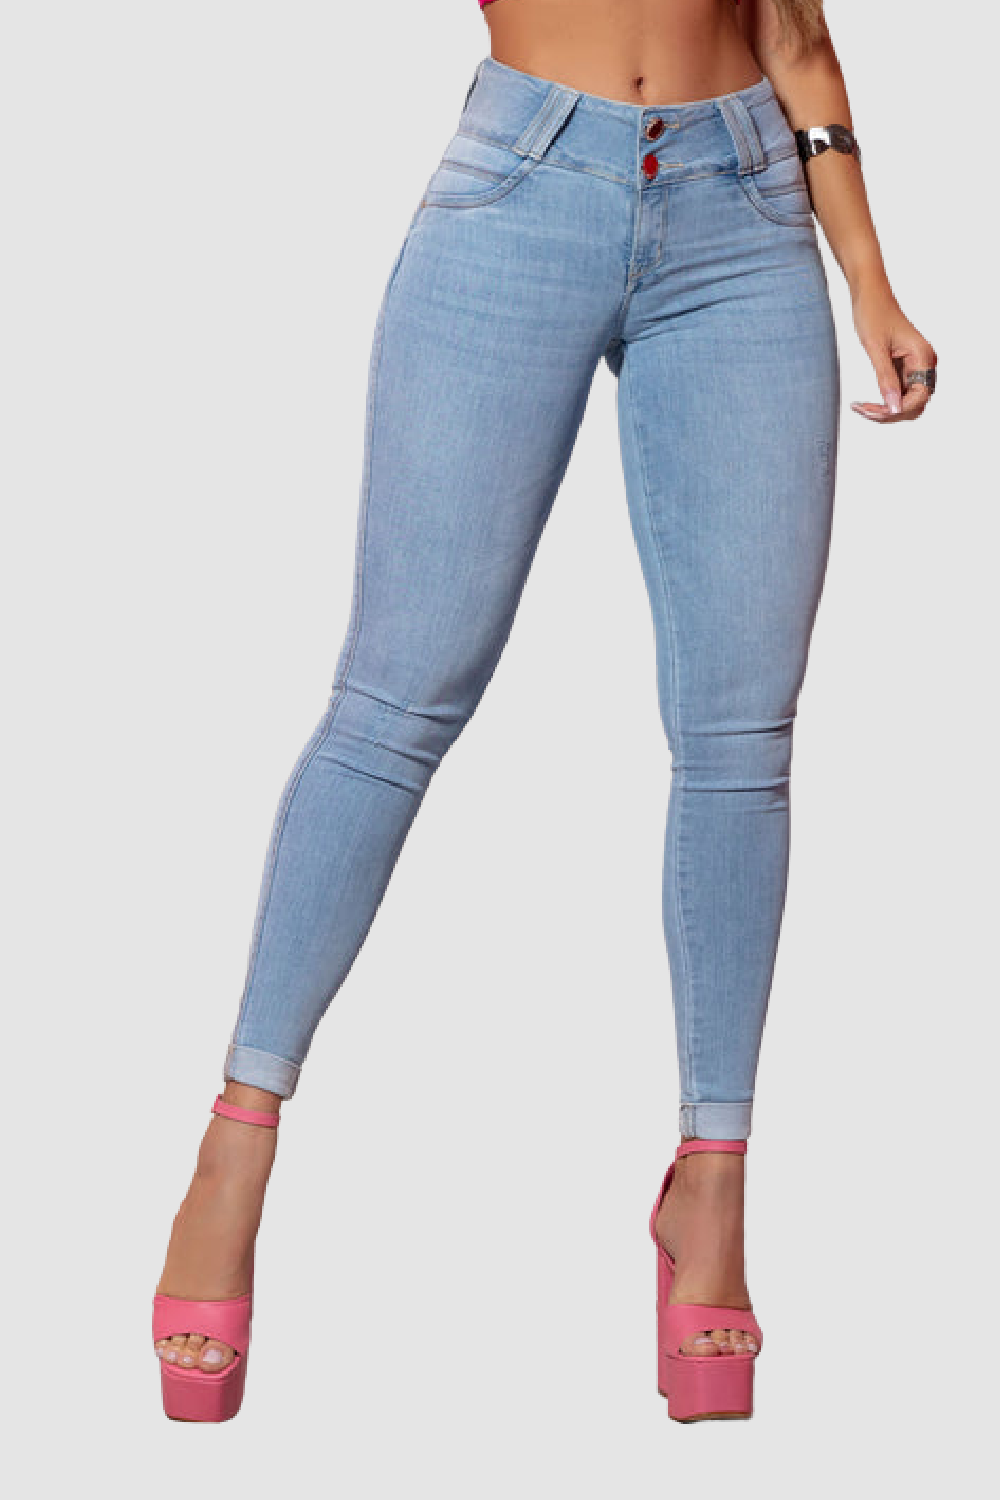 Light Couture URock – Wash Skinny Jeans